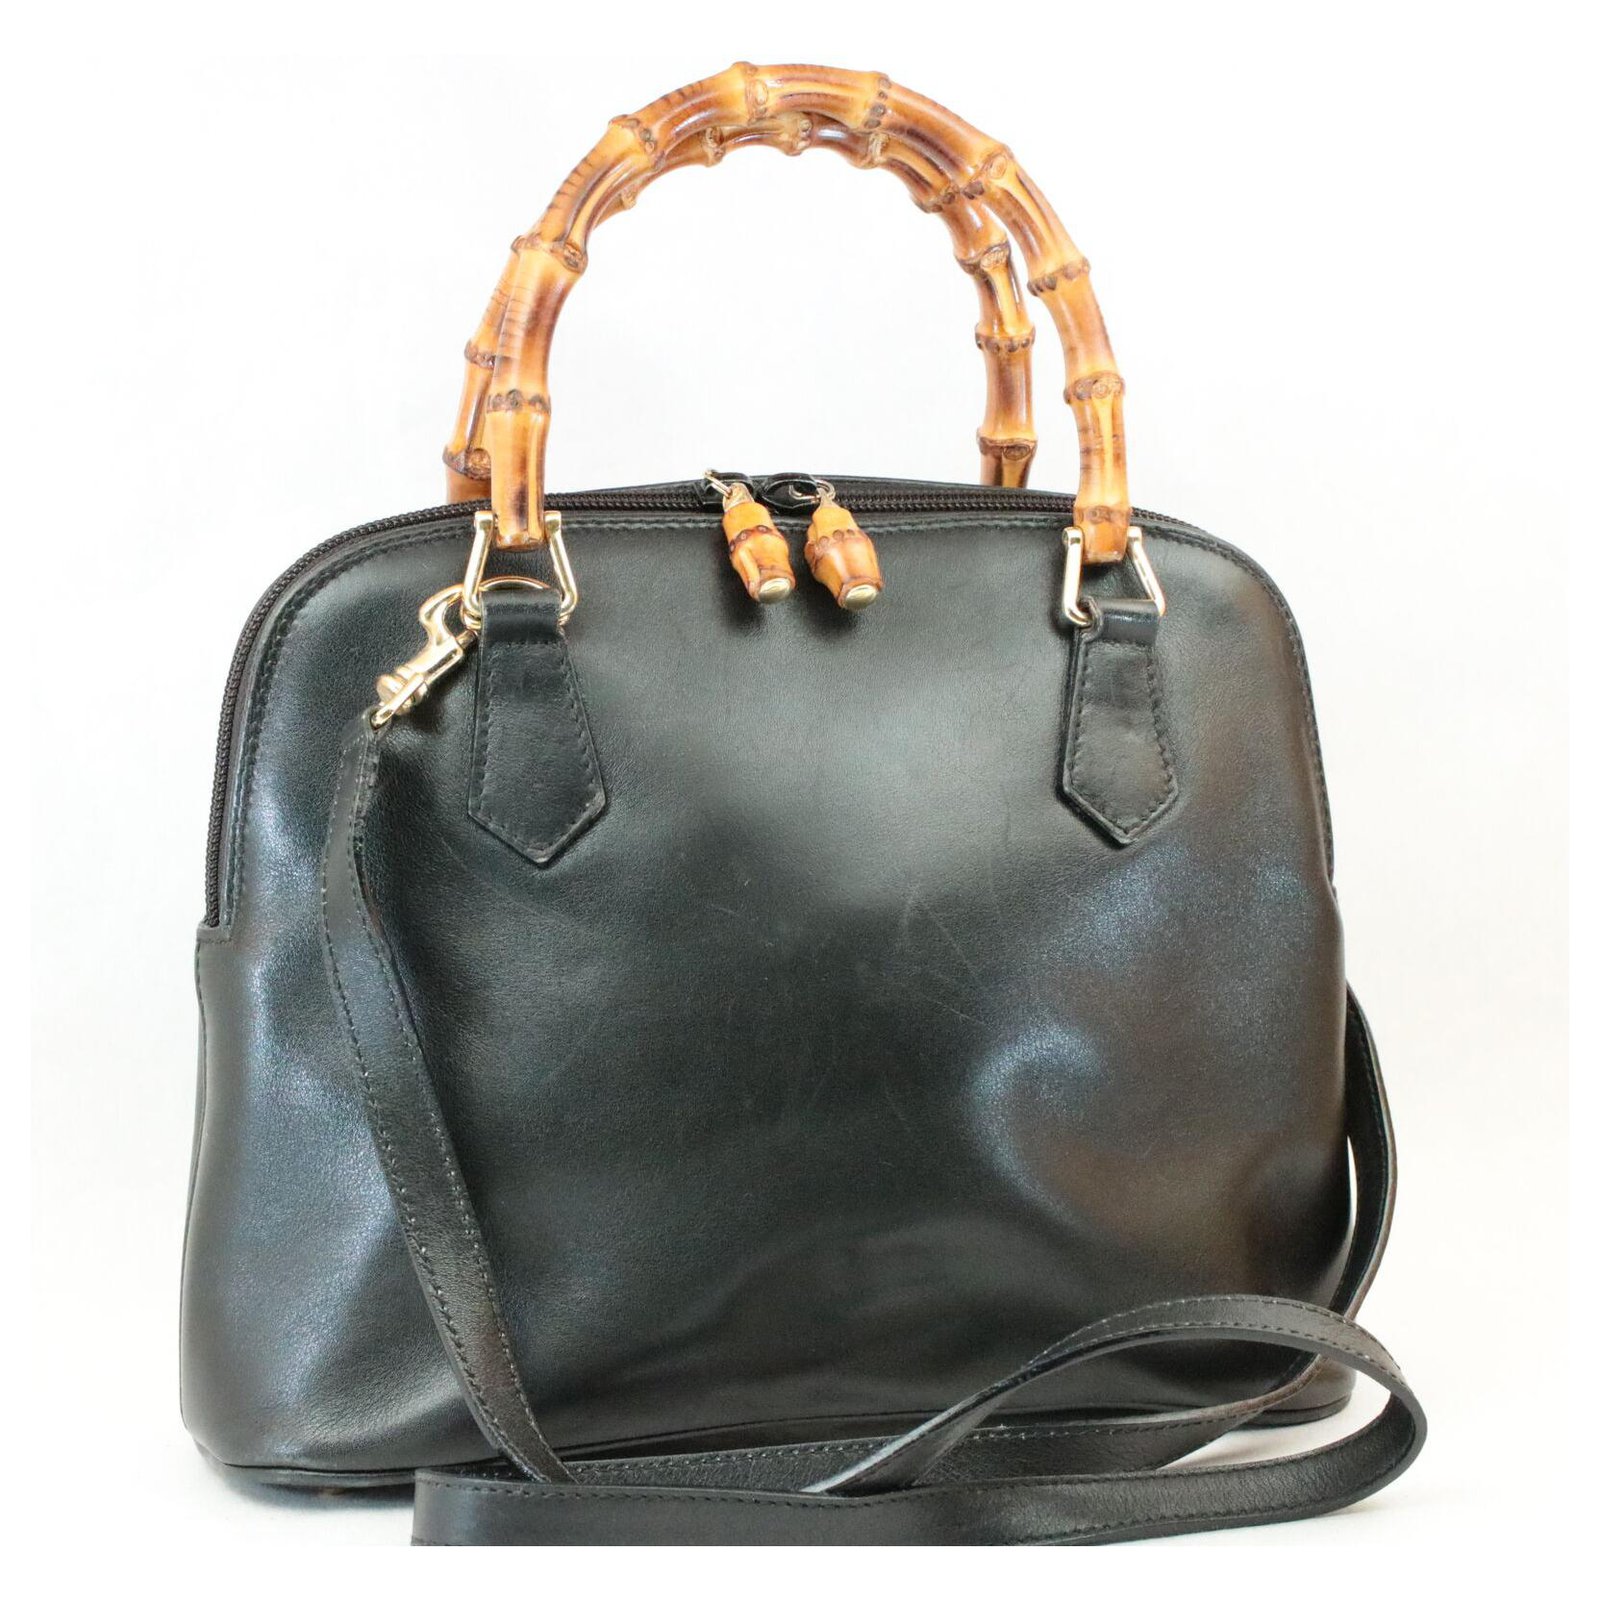 Gucci Vintage Alma Tote in Dark Brown Leather with Bamboo Handles